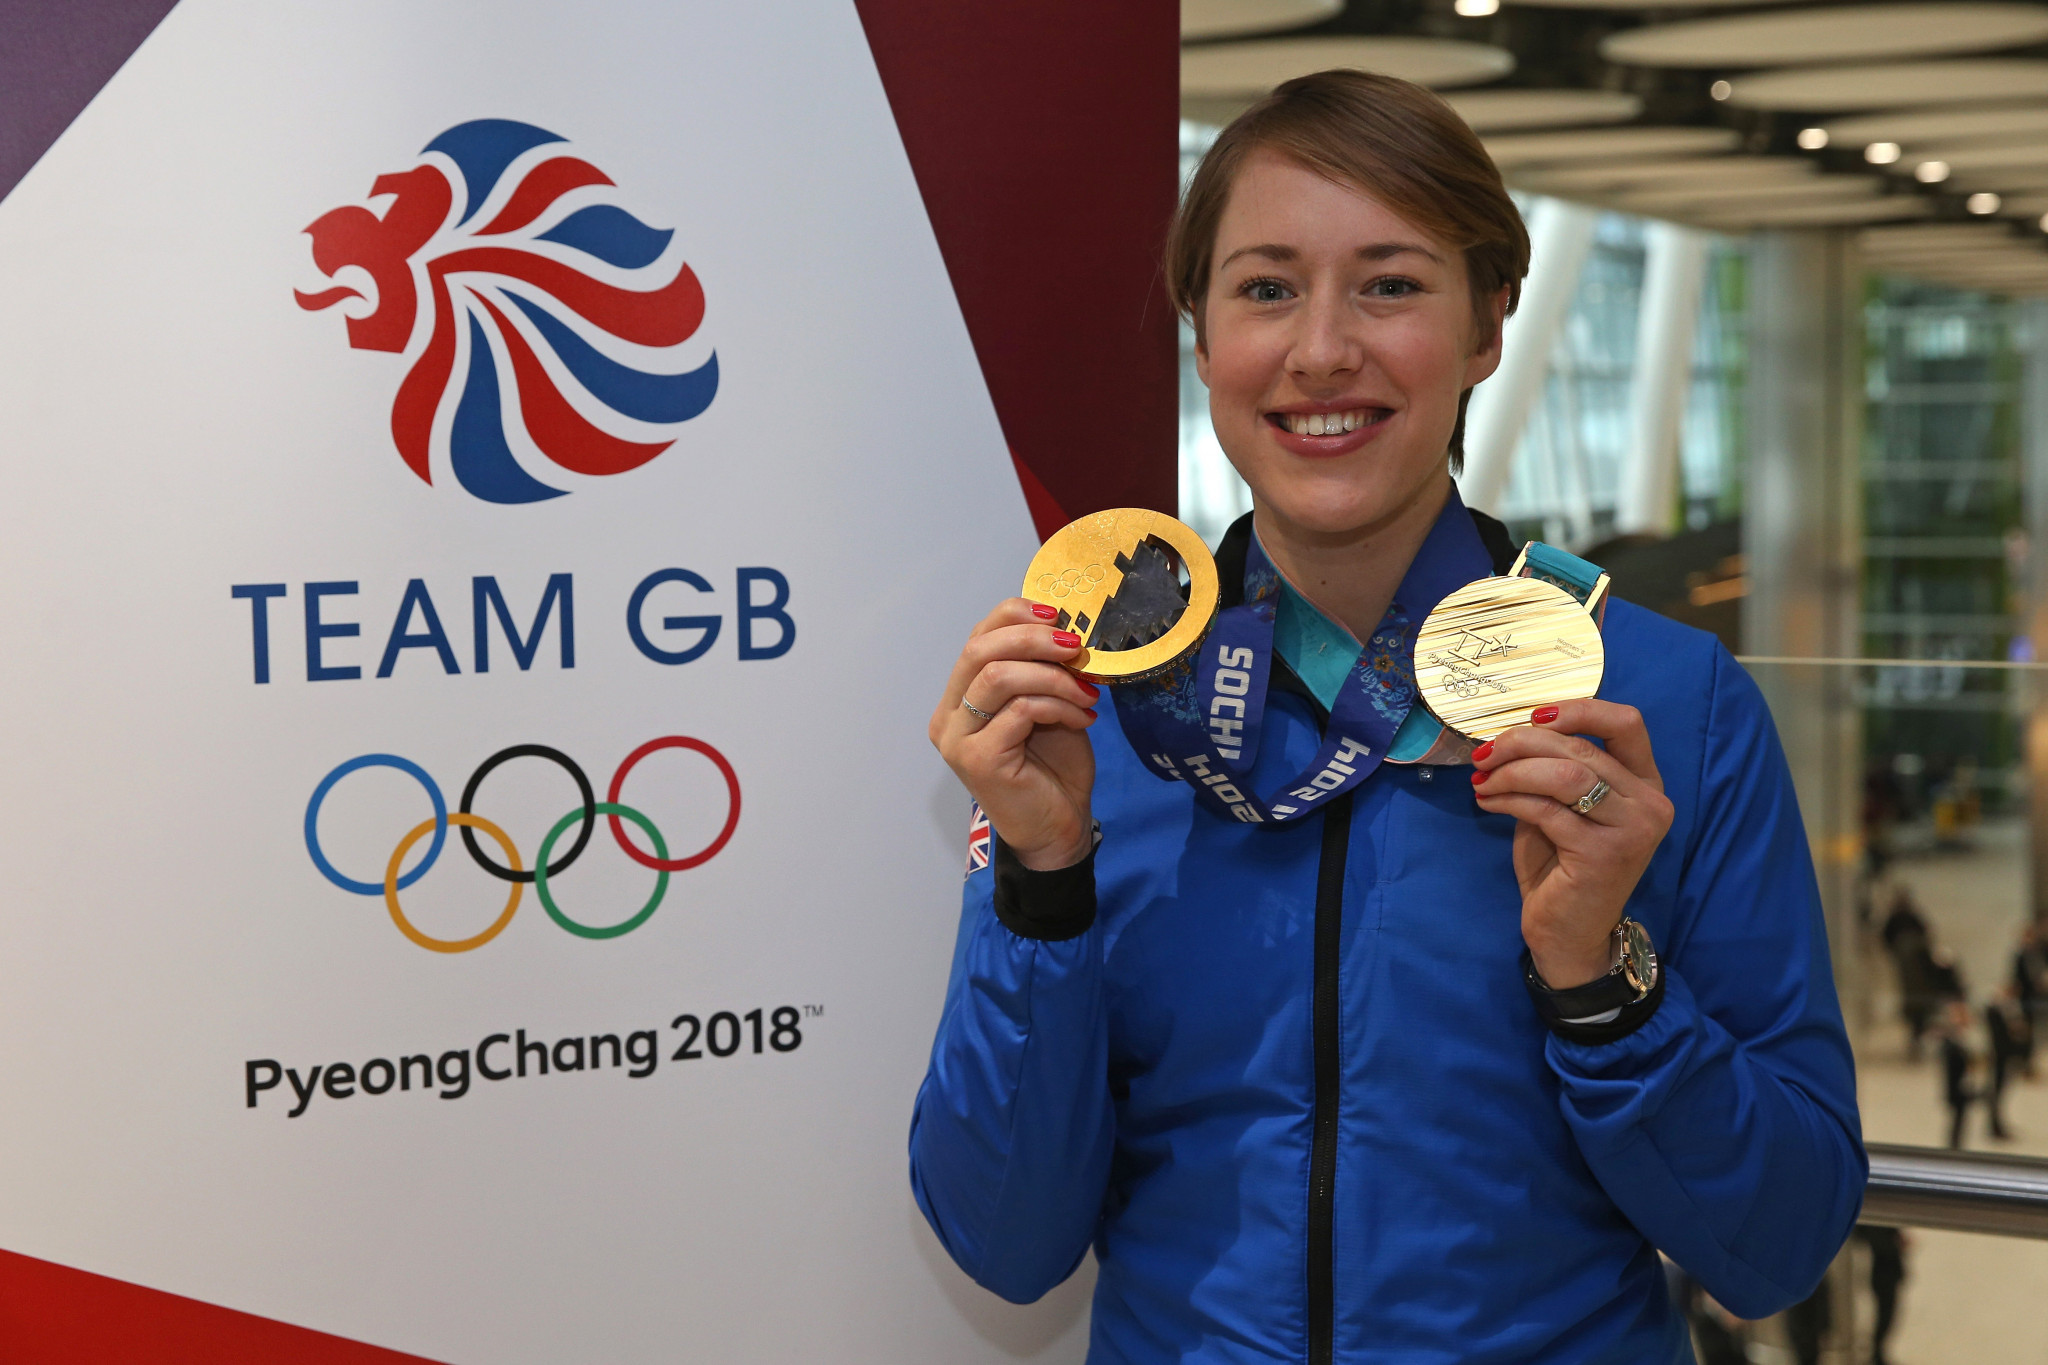 Lizzy Yarnold was Britain's star performer at the Pyeongchang 2018 Winter Olympics